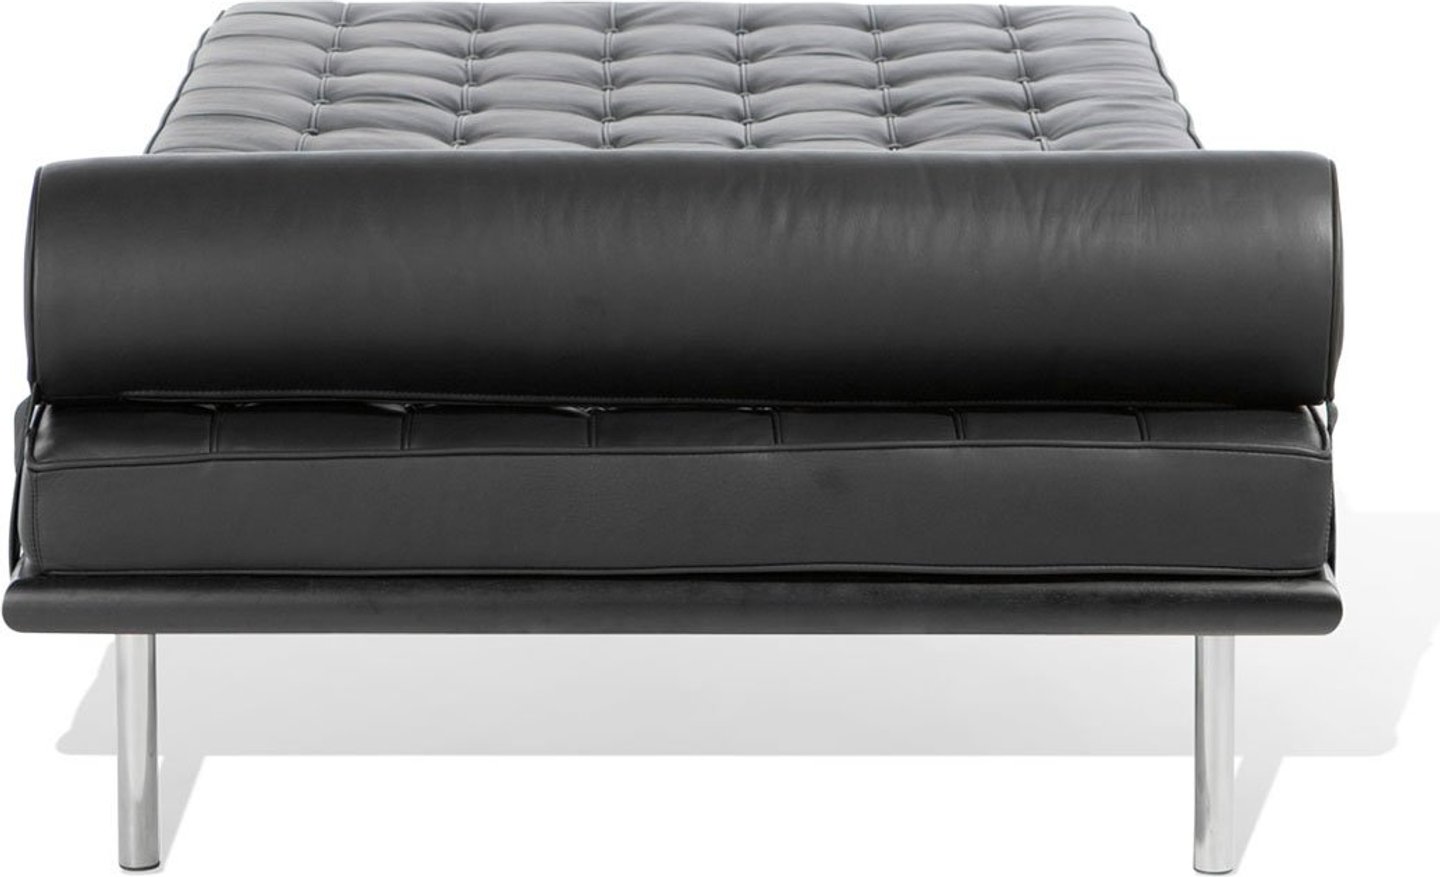 Daybed Barcelona Black/Black Lacquered image.